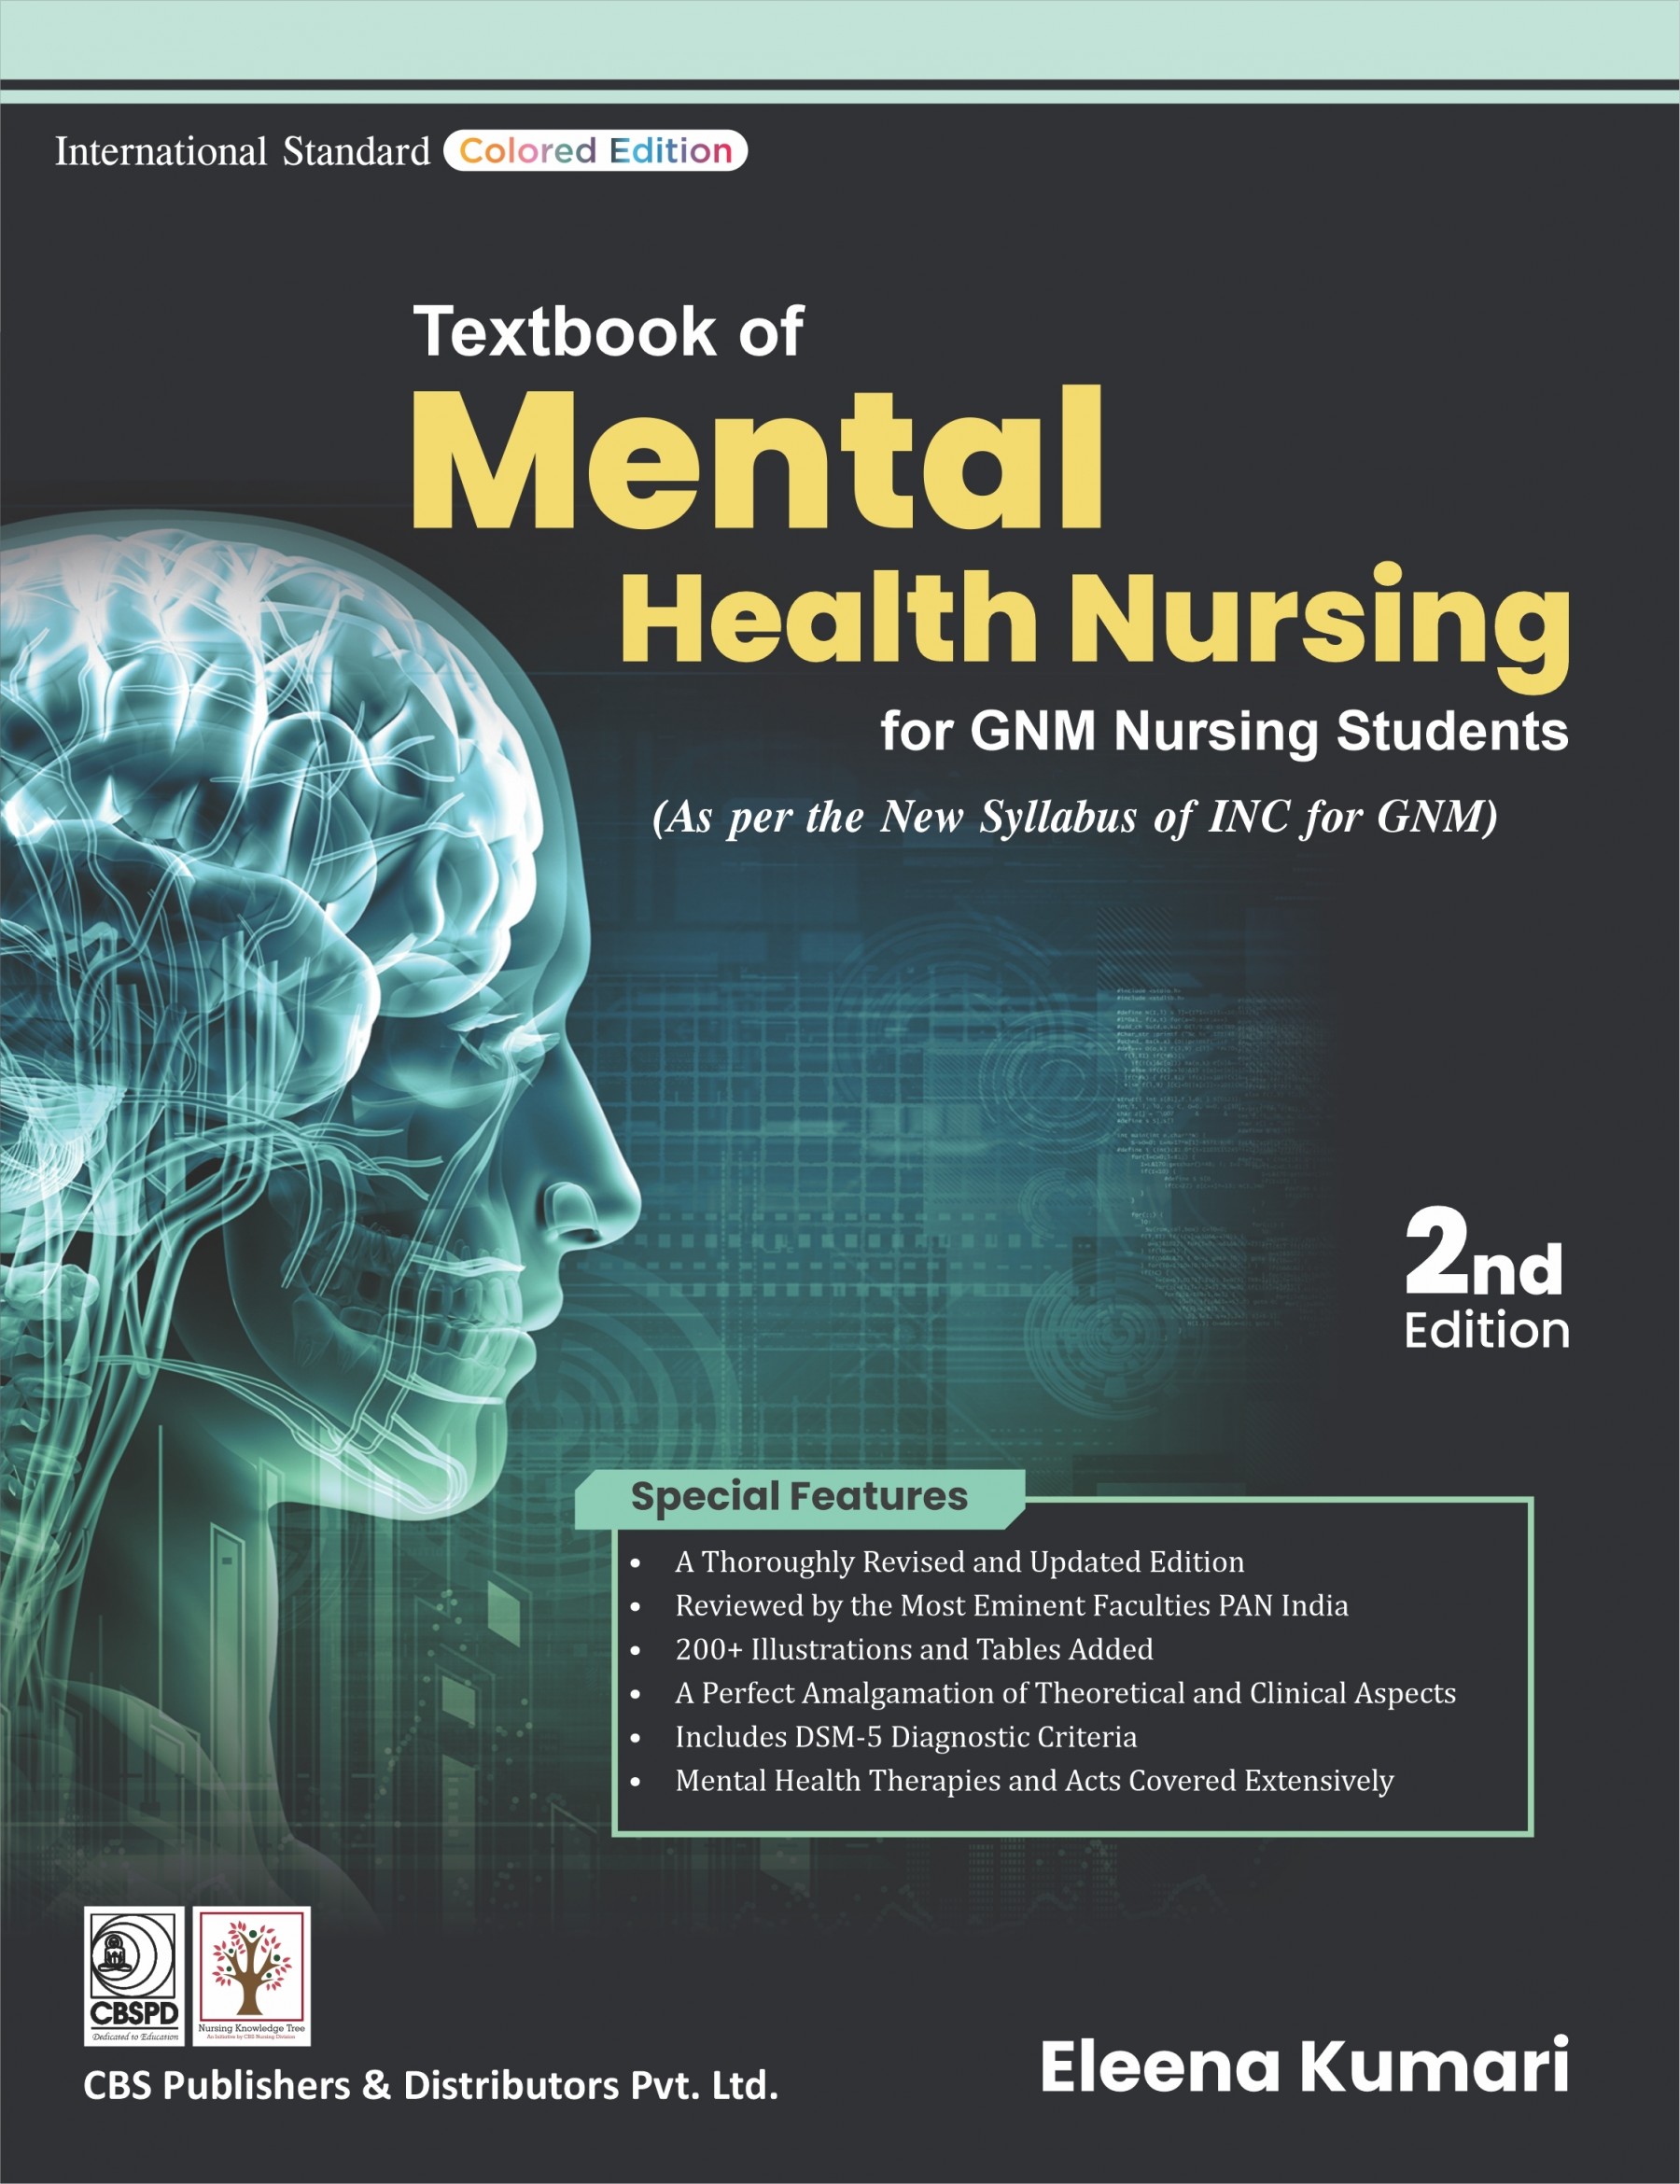 Textbook of Mental Health Nursing for GNM Nursing Students (As per the revised INC Syllabus)